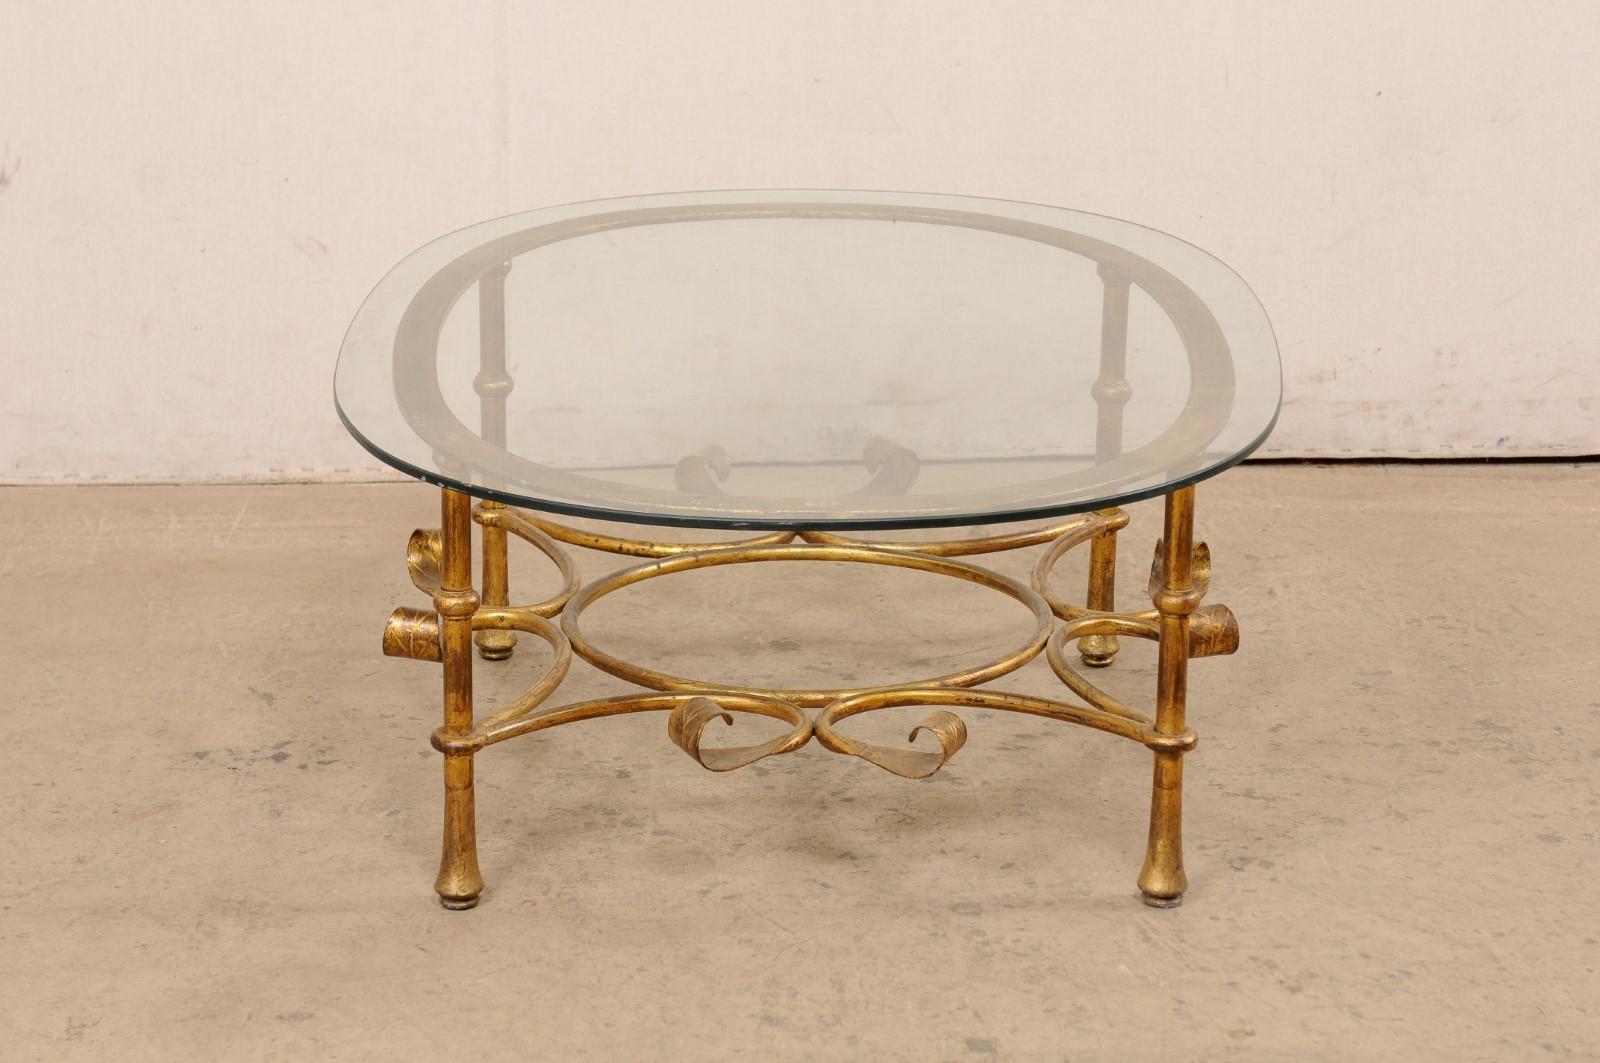 Spanish Oval Glass-Top Table with Iron Base (Gold Finish), Mid 20th C. 1